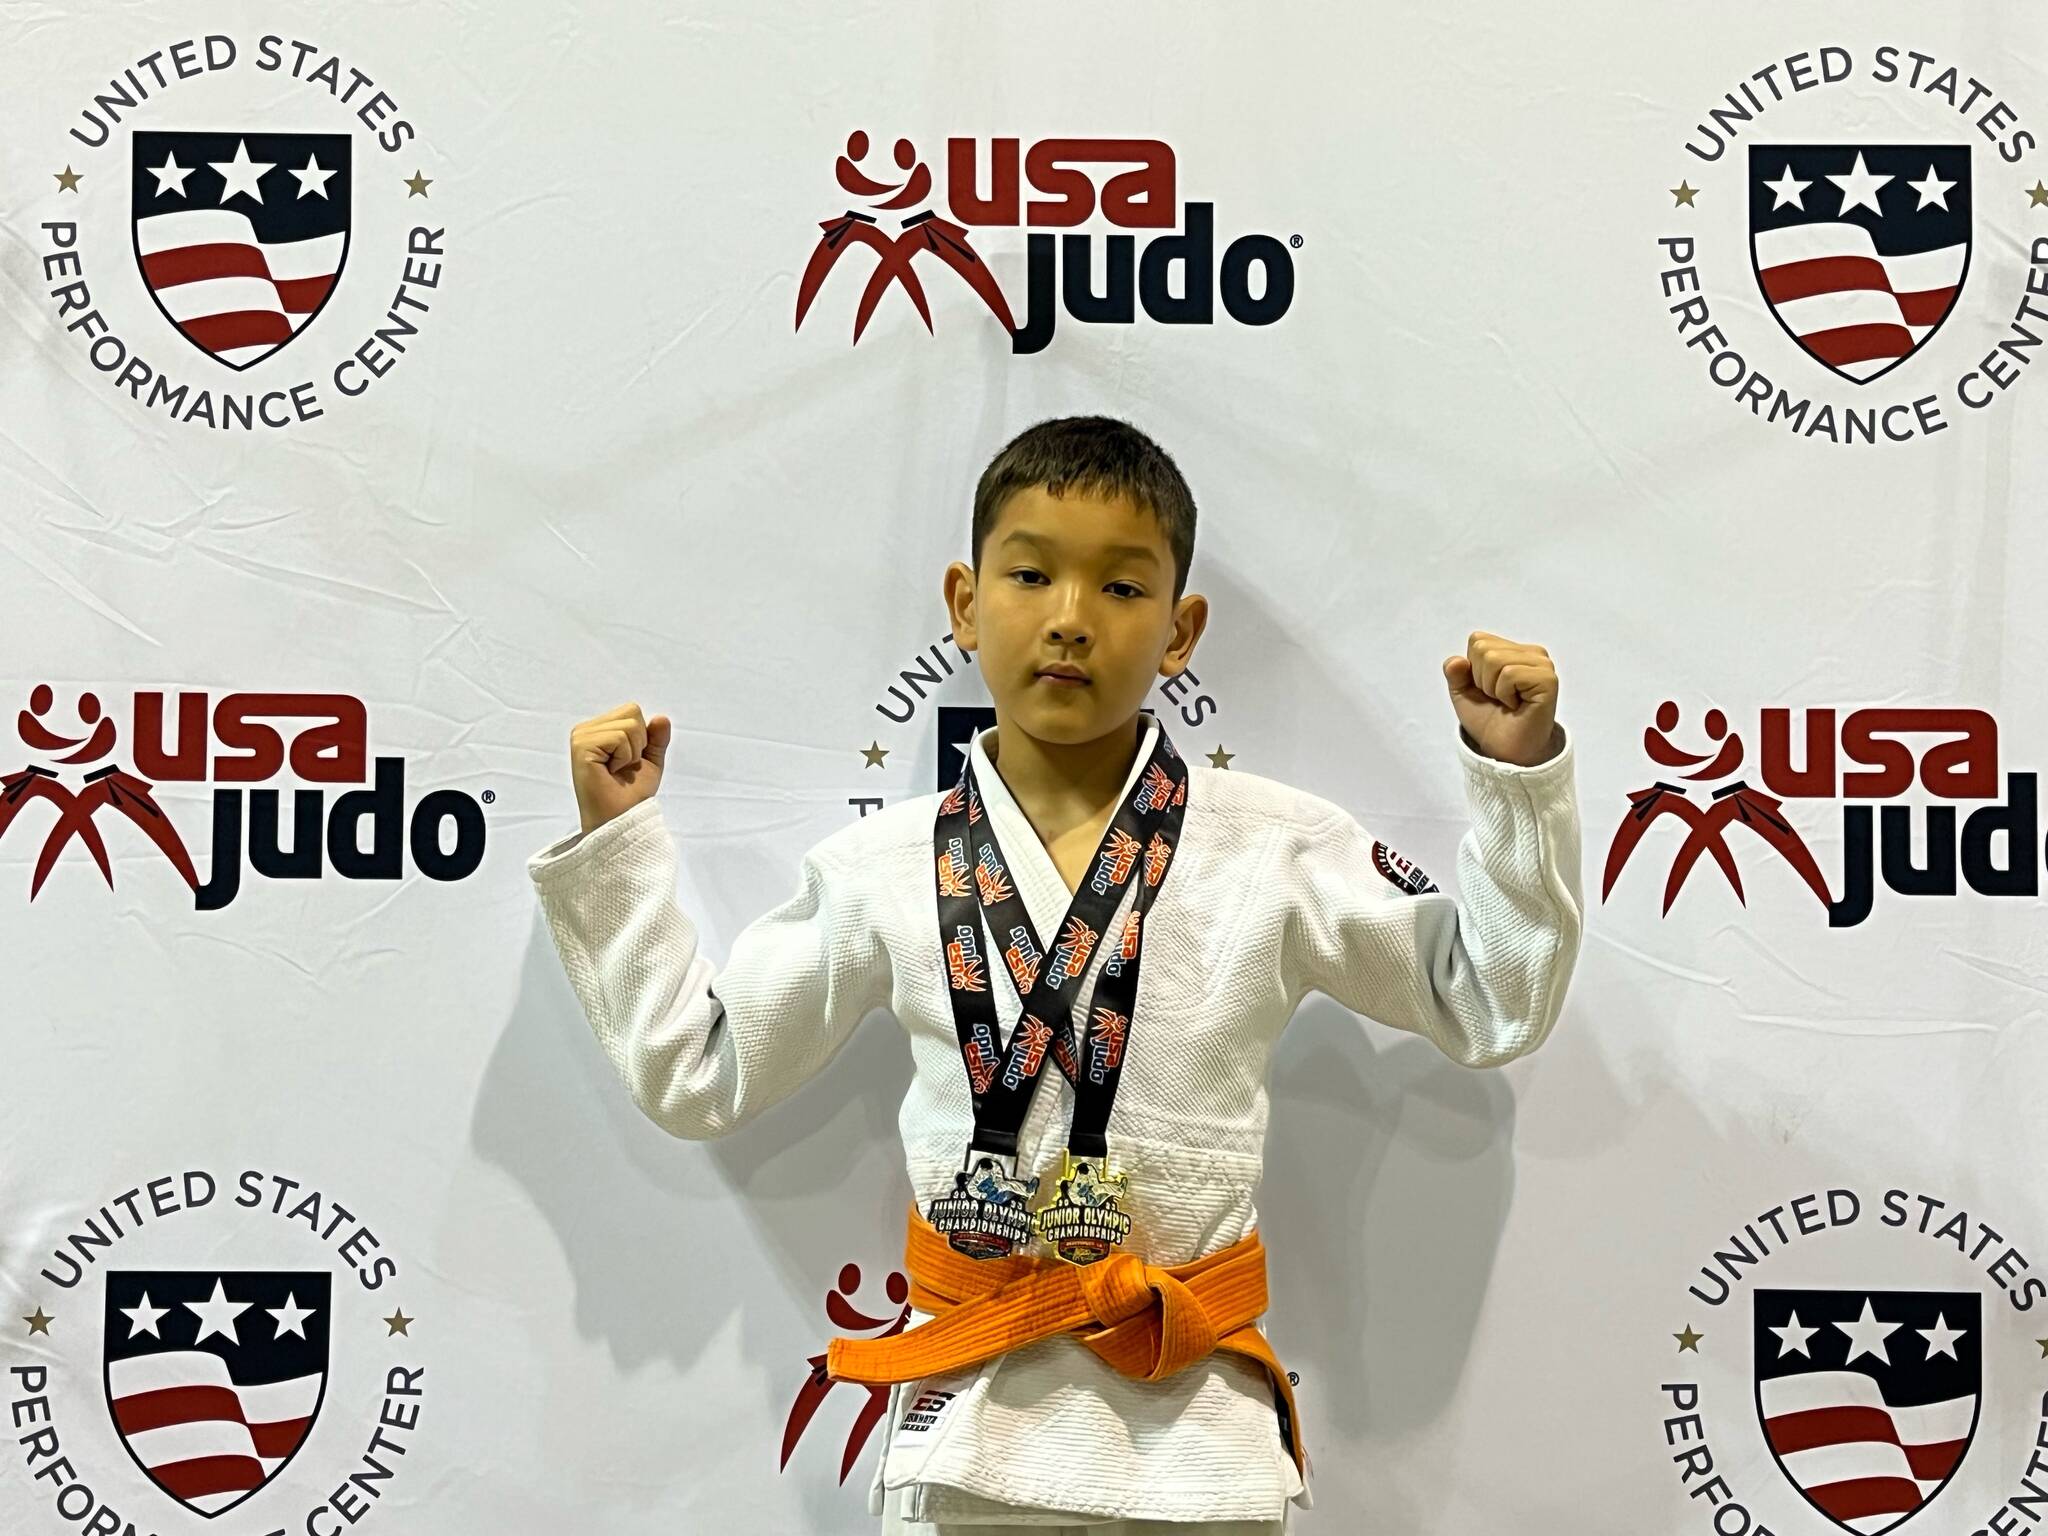 Northwood Elementary School second-grader Mikhail Zulaev won gold and silver medals at the USA Judo Junior Olympic Championships from June 16-18 in Shreveport, Louisiana. At the 500-athlete international tournament, Mikhail earned a gold in the Bantam 2015 birth year category (from 4 to 30 kg) and notched a silver in the 2014 Bantam birth year category (5 to 29 kg). Mikhail trains at the Washington Judo Academy in Kirkland. Courtesy photo